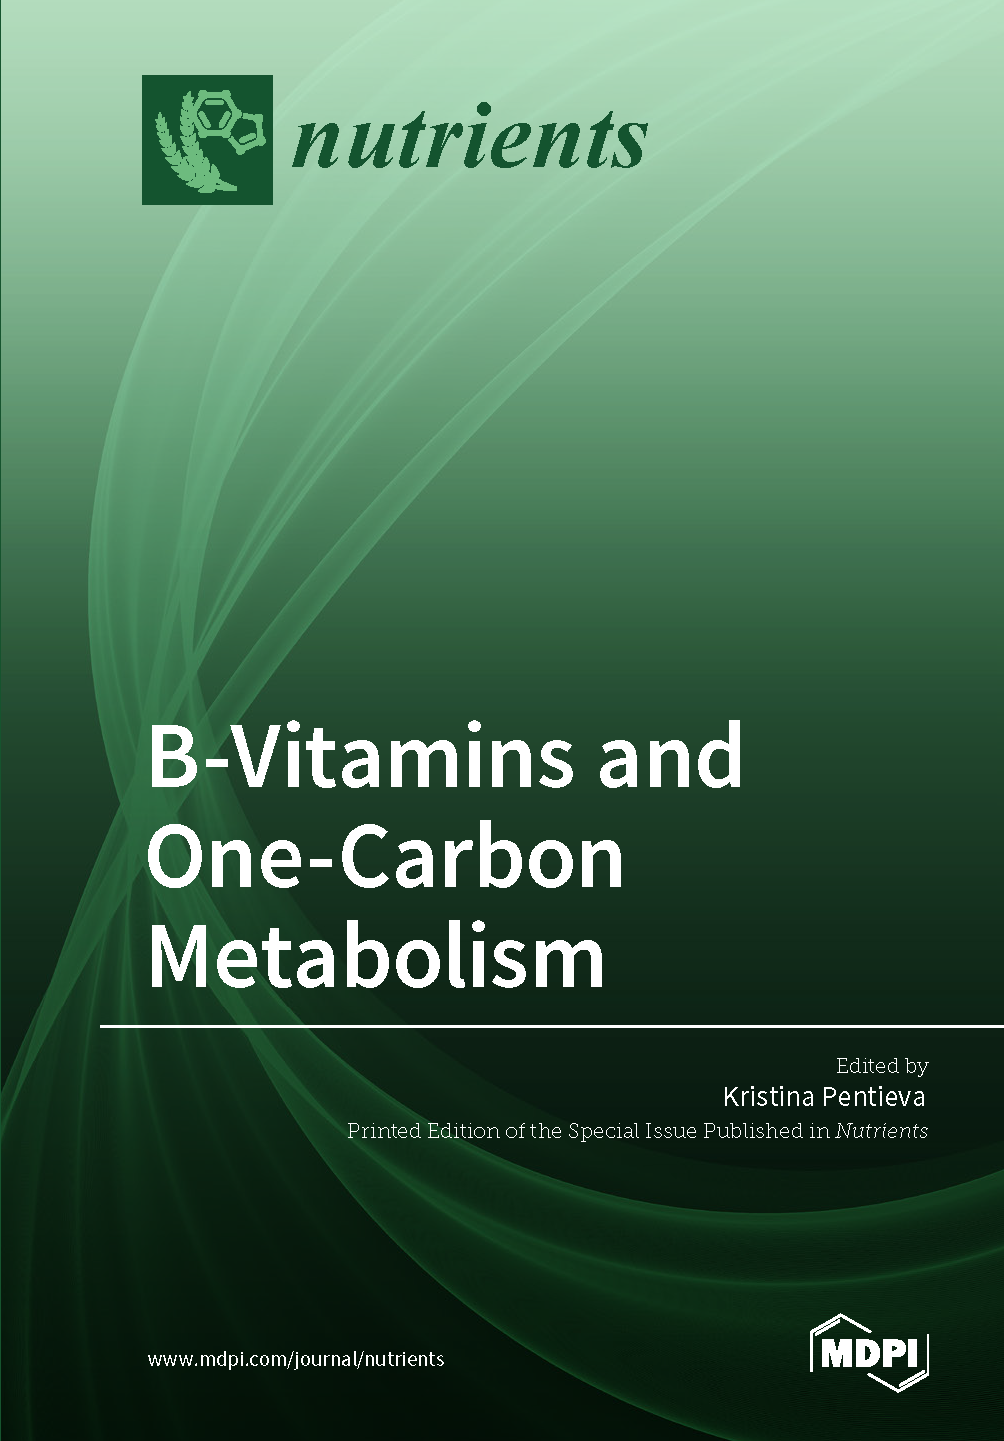 B-Vitamins and One-Carbon Metabolism